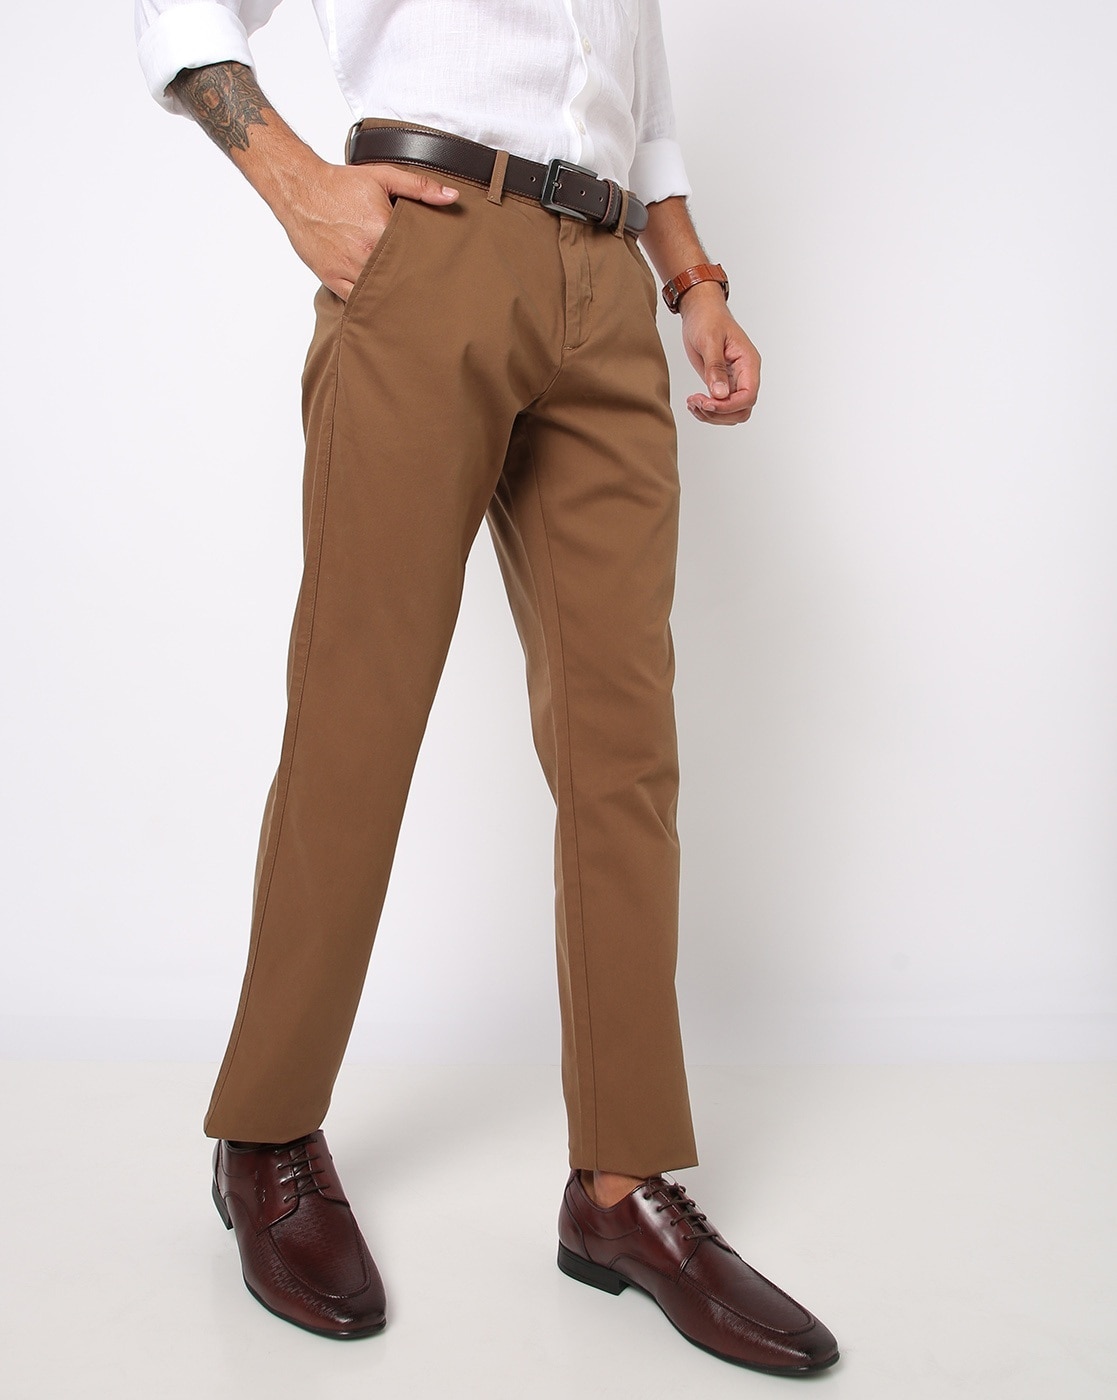 Beige and Black Plain Cotton Formal Chinos Trousers